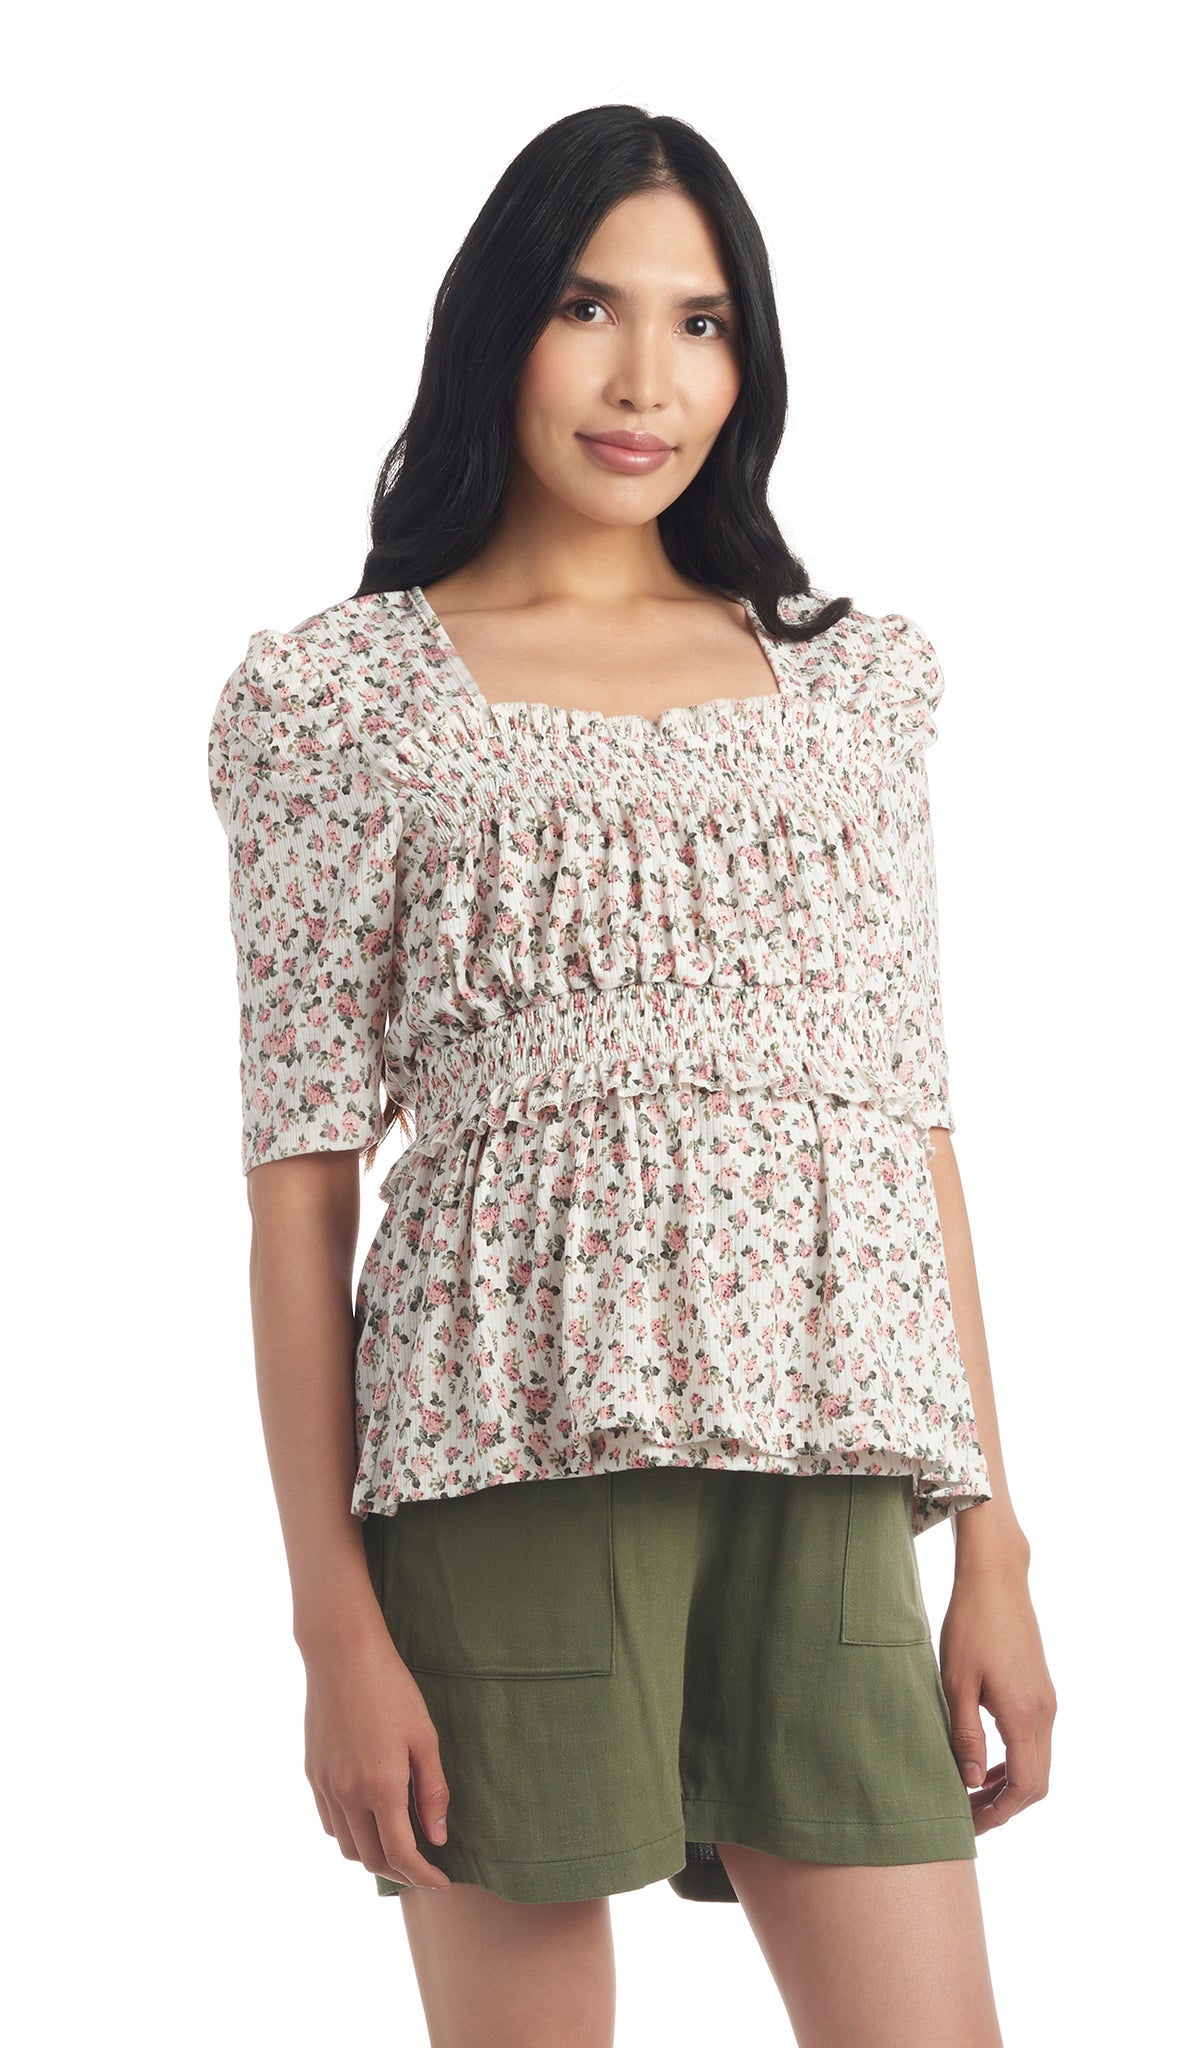 Ivory Floral Tracey top worn by pregnant woman with olive shorts.